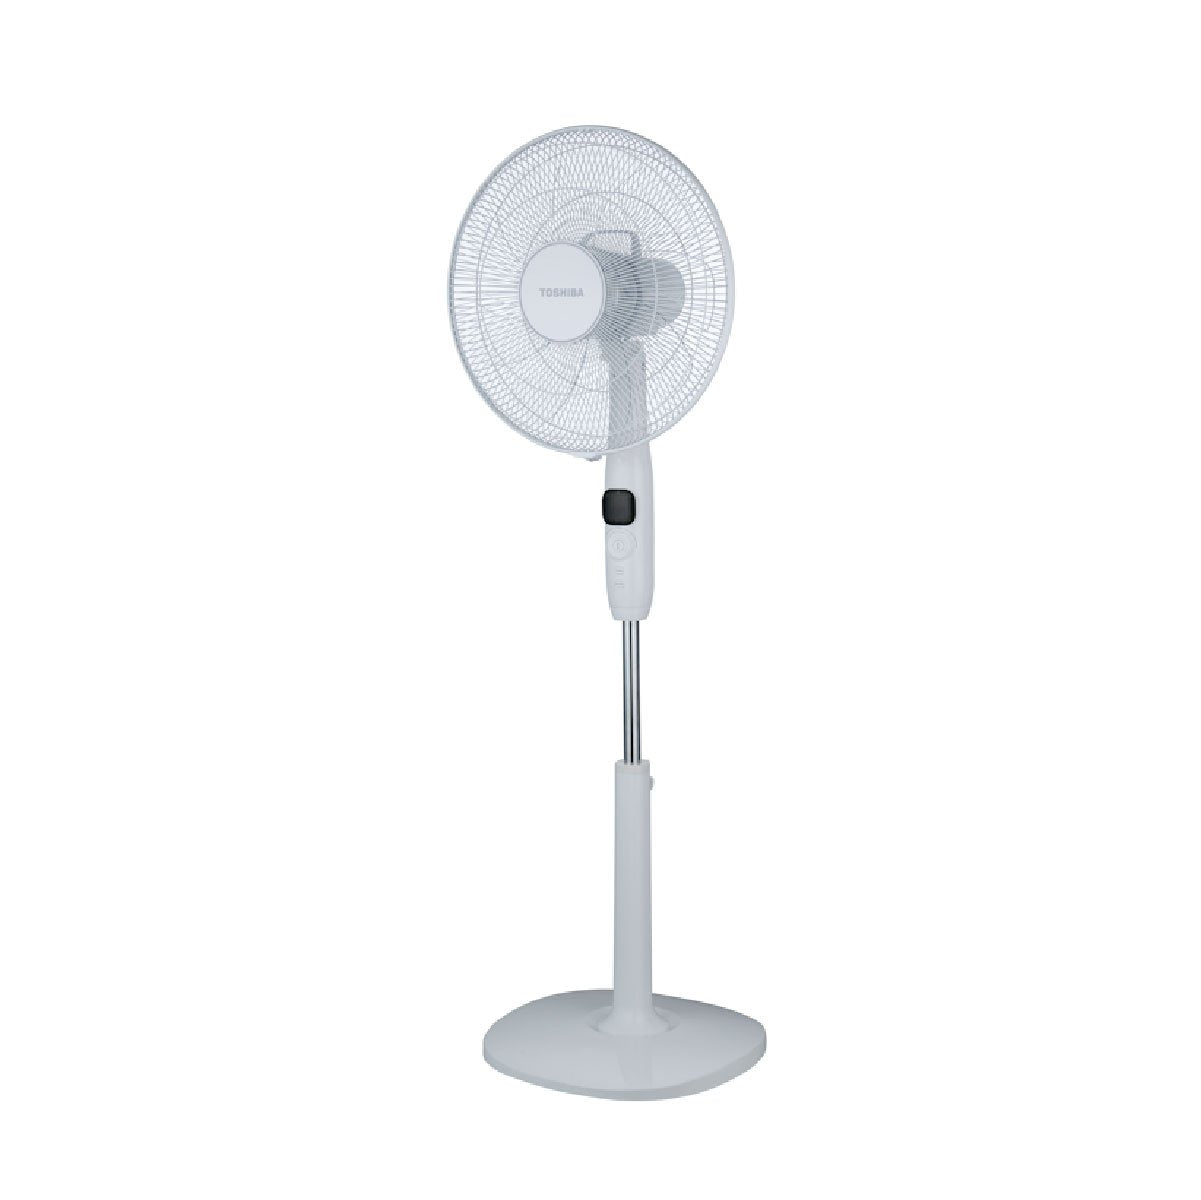 Great Value Matters Toshiba Remote Control 16 Inches Digital DC Stand fan